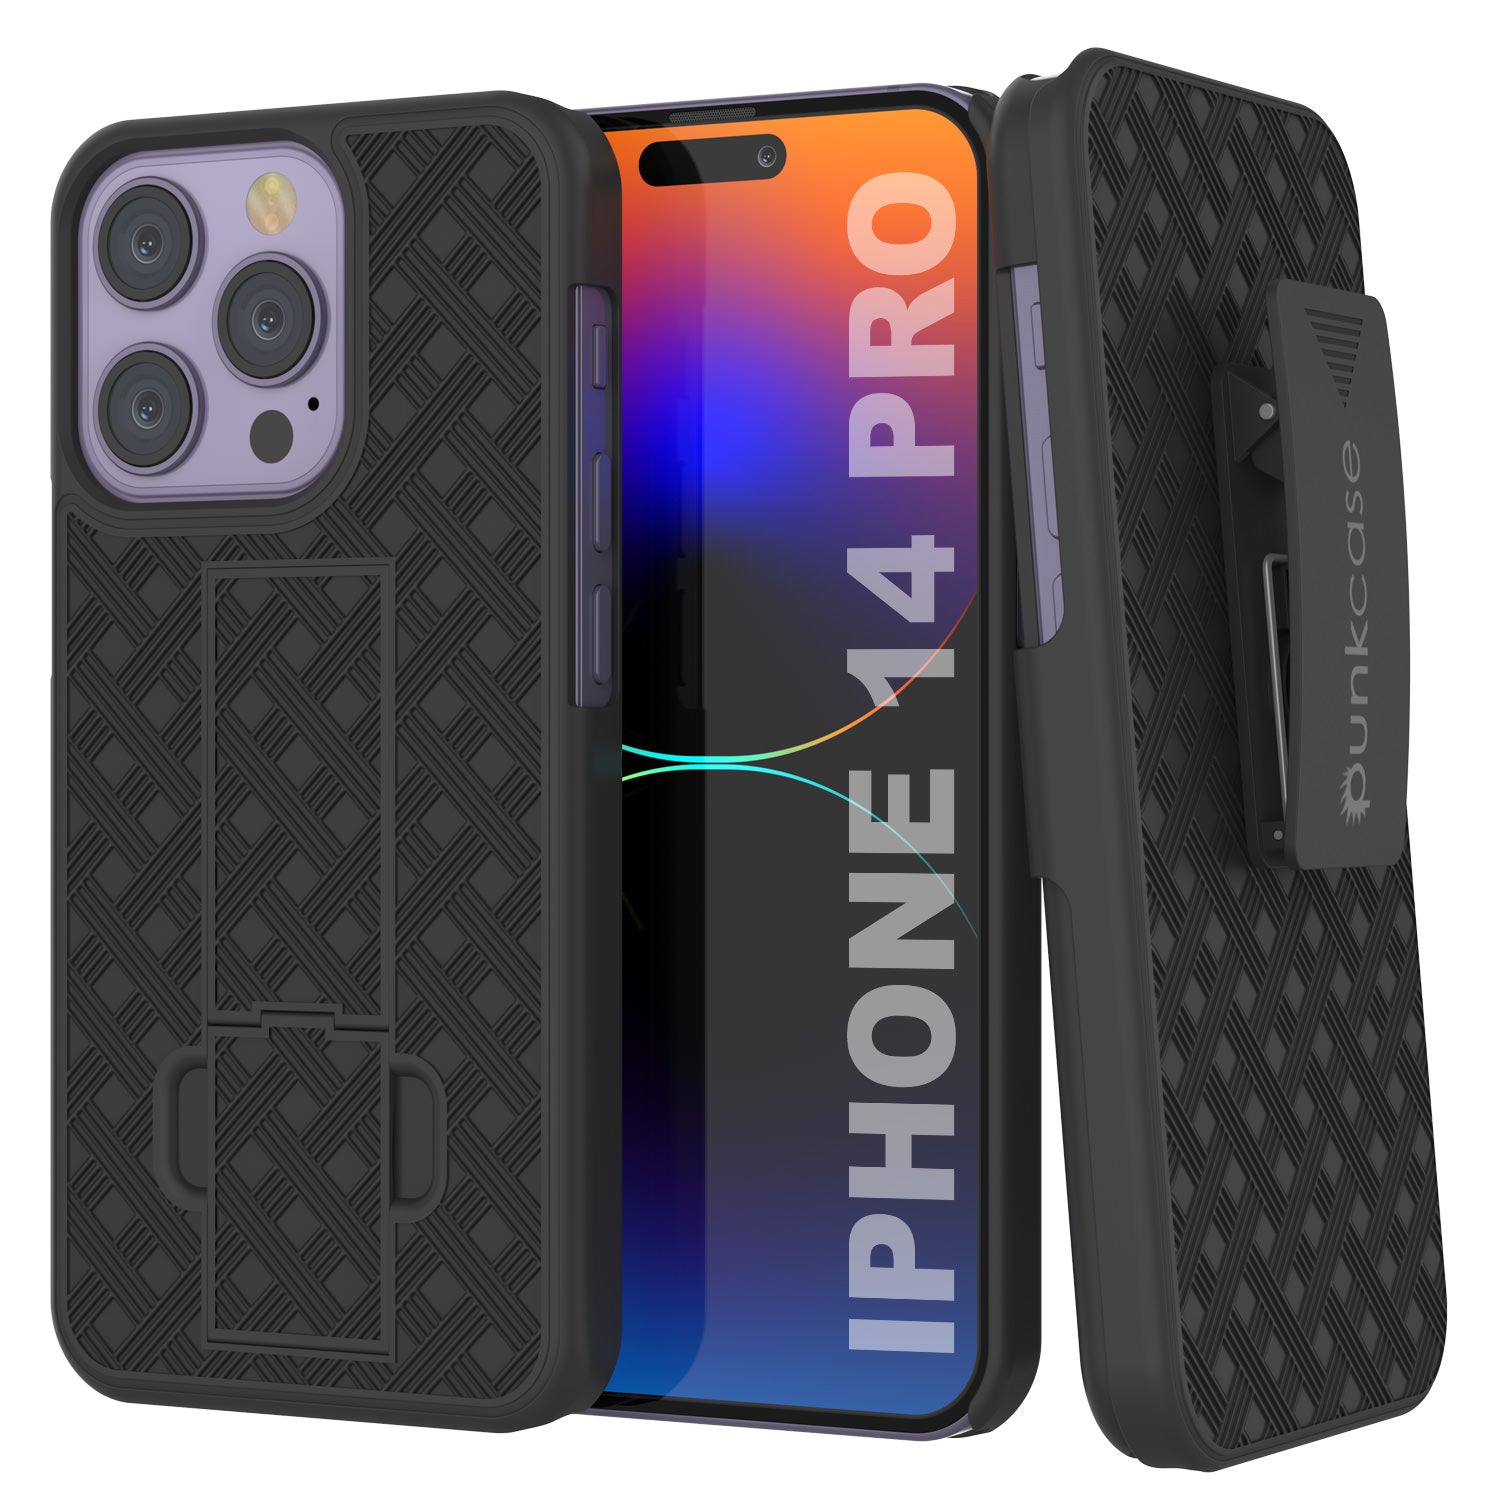 iPhone 15 Pro Case With Tempered Glass Screen Protector, Holster Belt Clip & Built-In Kickstand [Black]